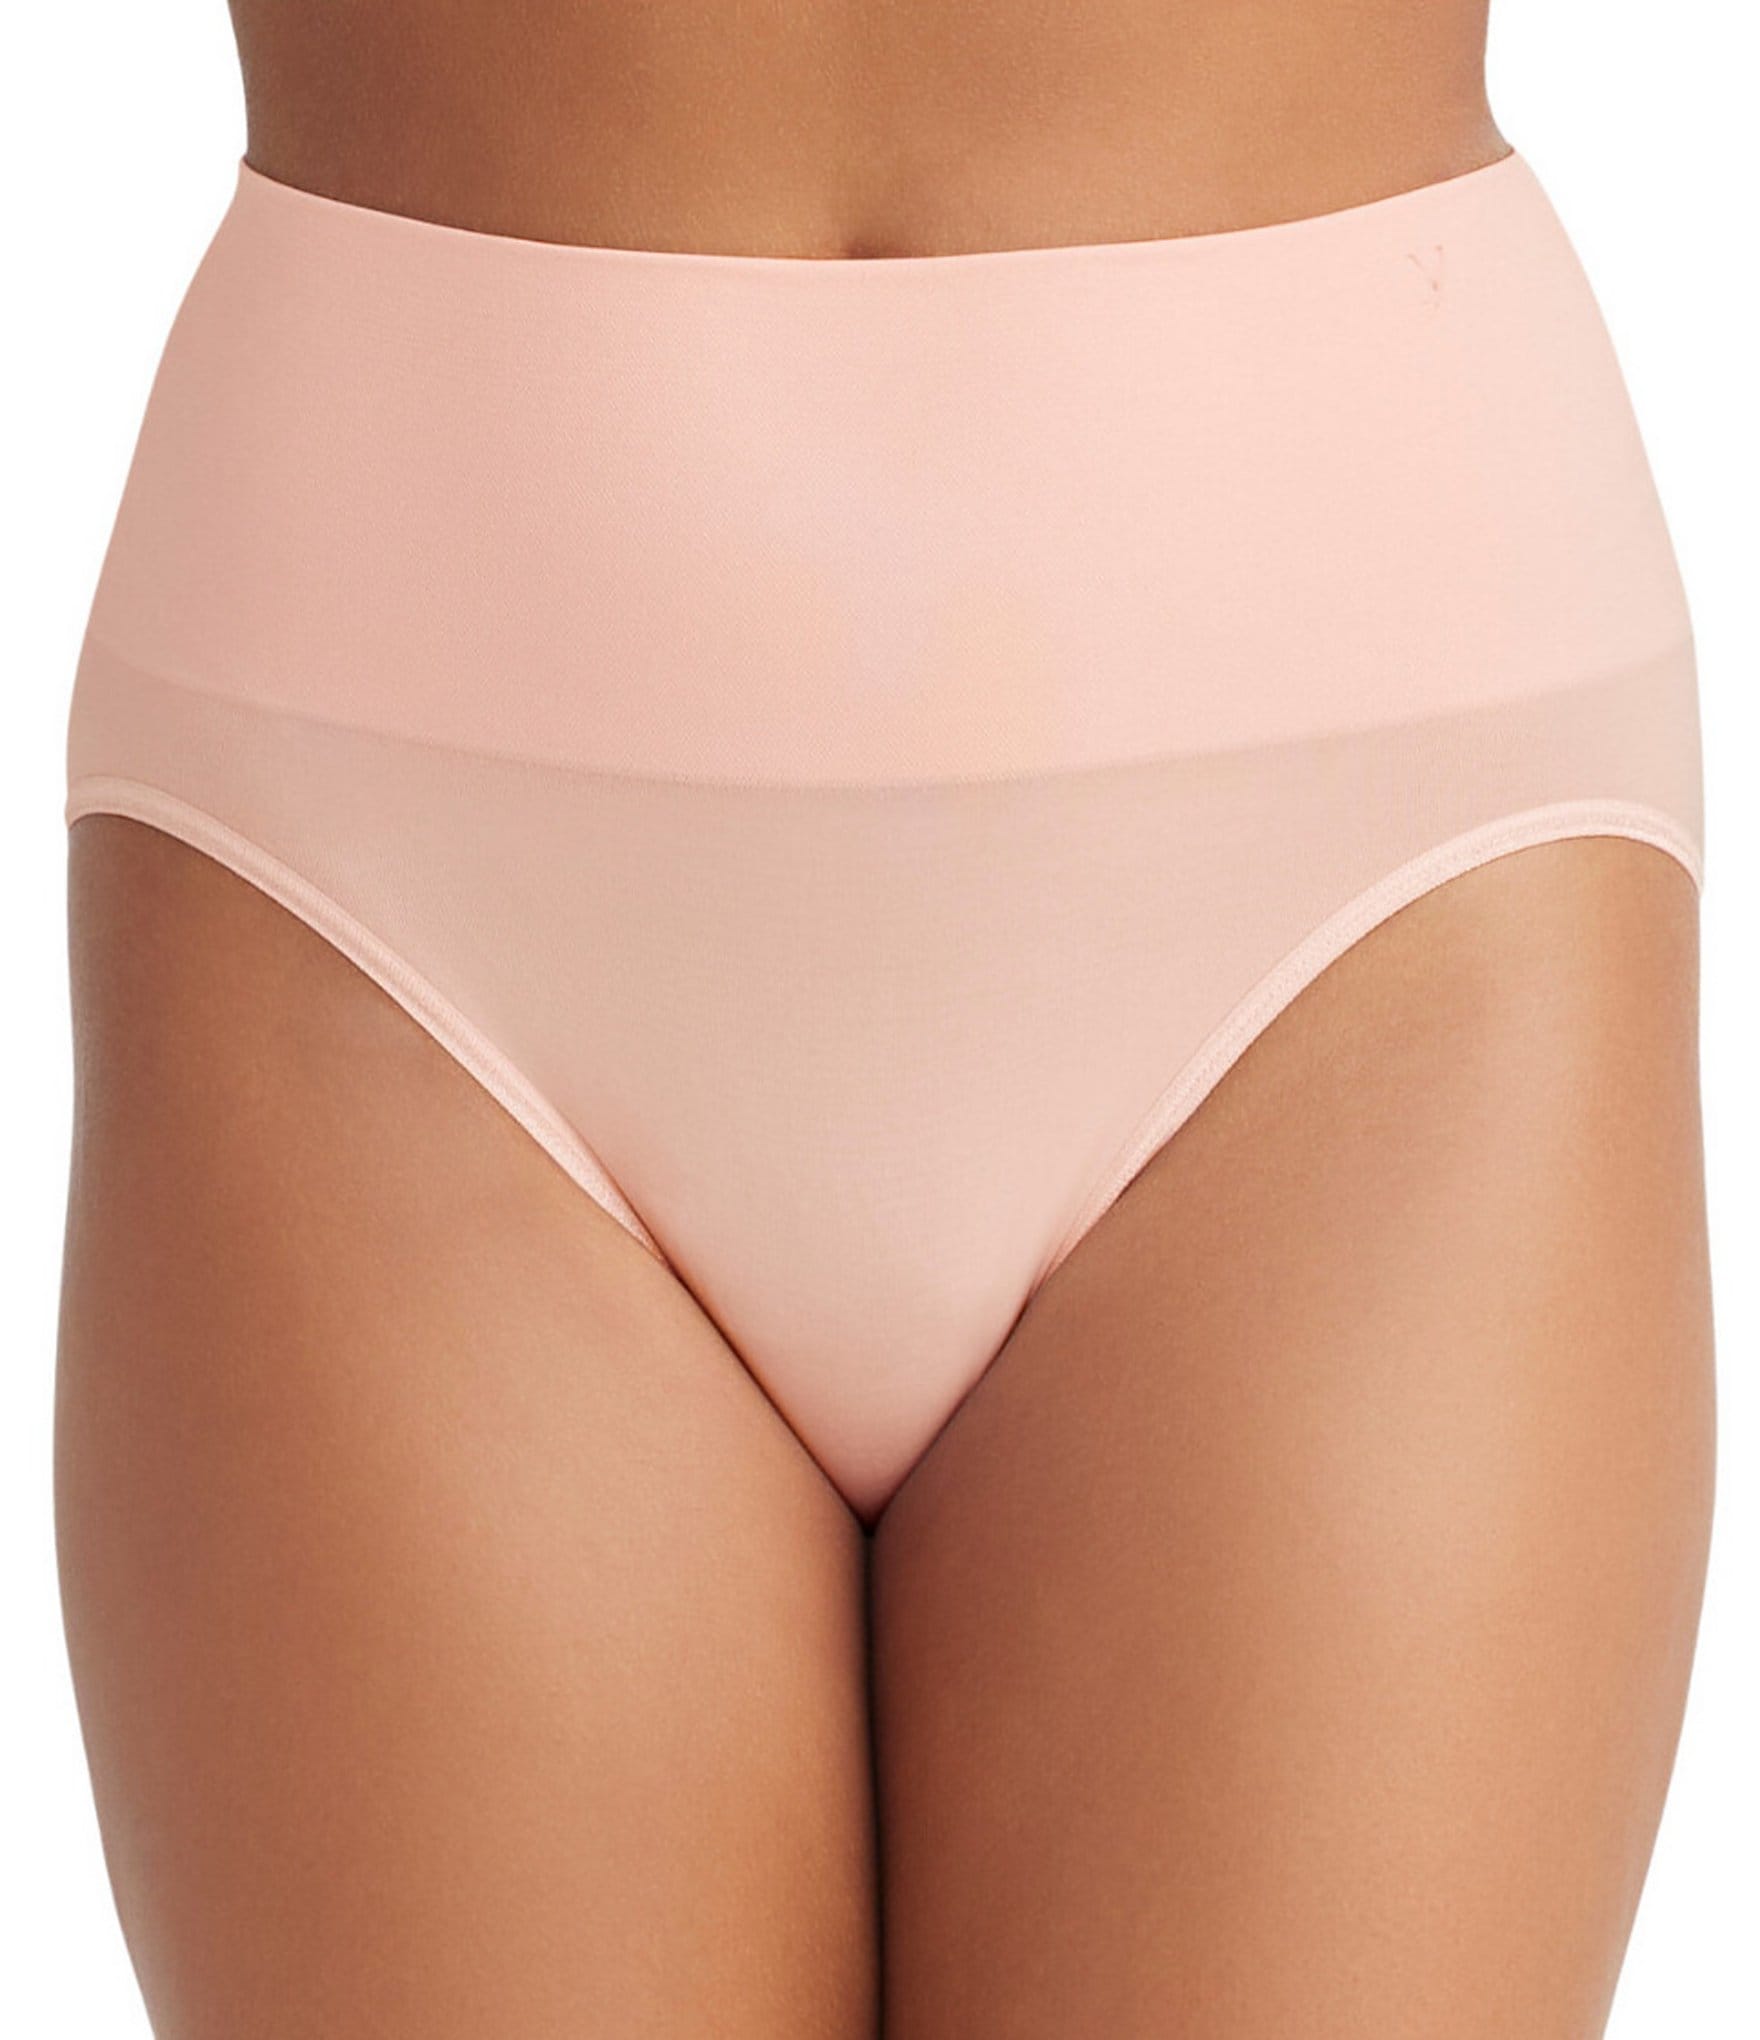 Paramour Women's Body Smooth Seamless High Leg Brief Panty